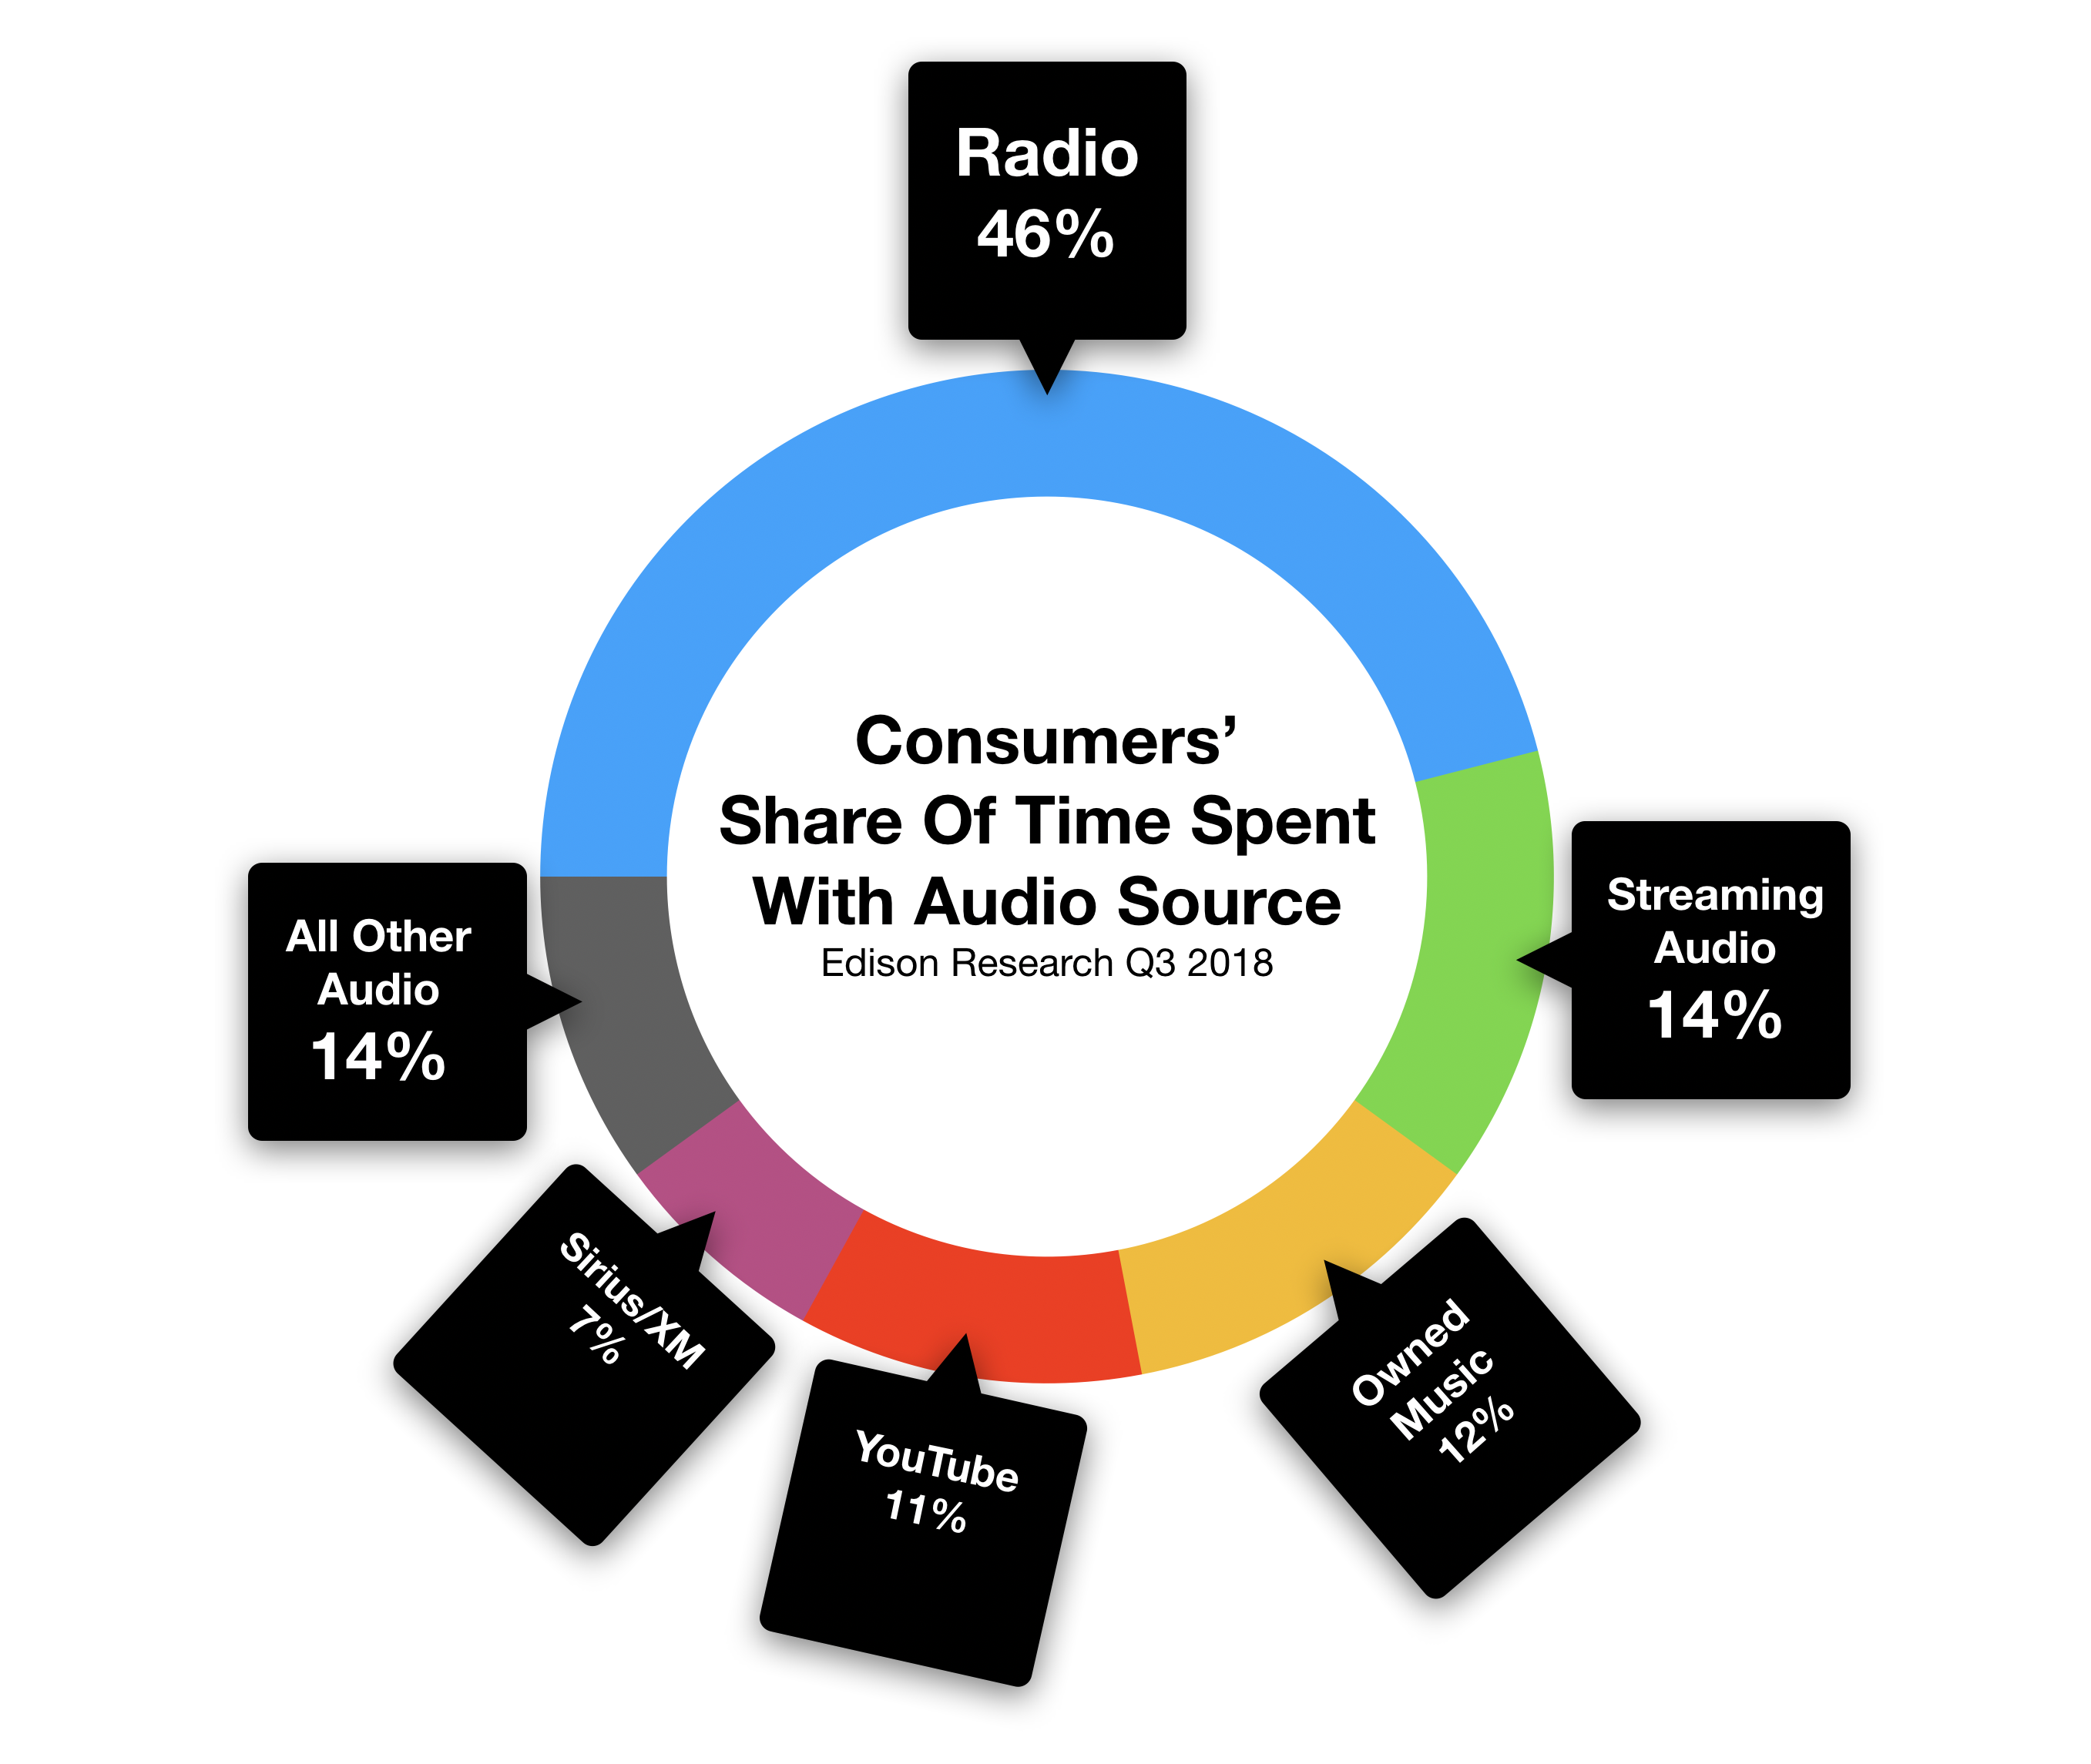 Fayetteville Consumer Share of Audio Time Spent With Radio